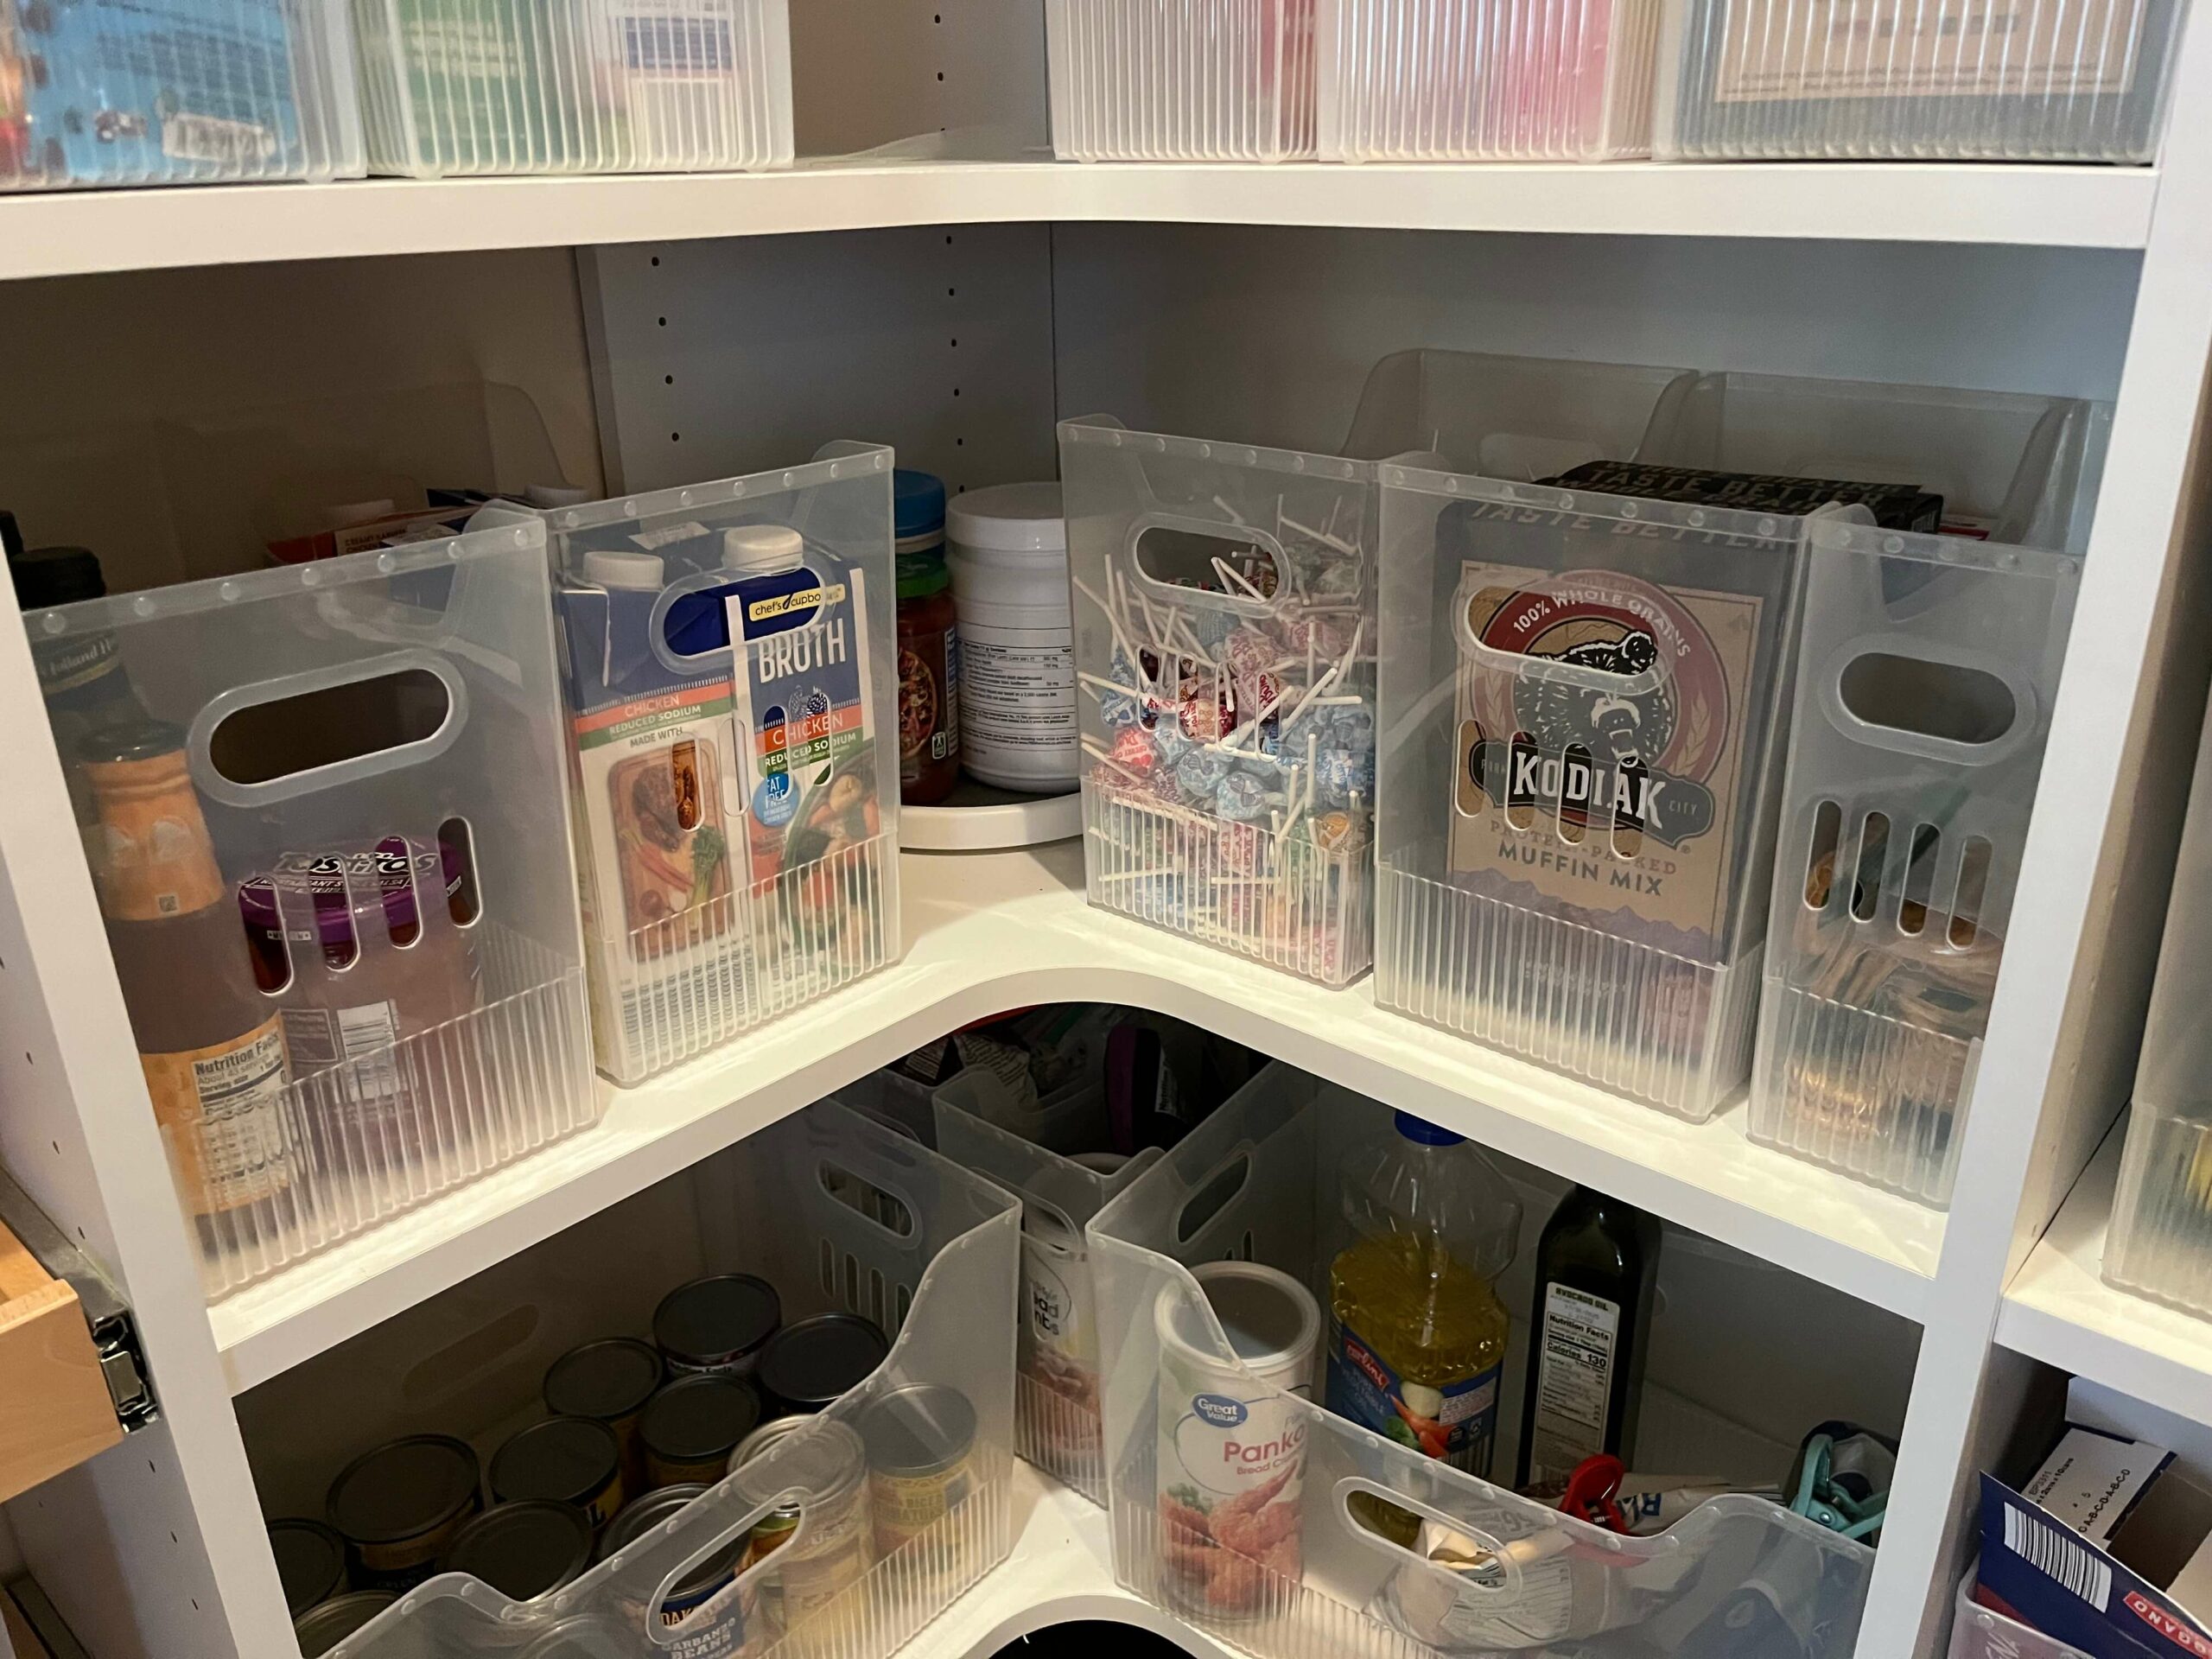 Dollar Tree Storage Containers Ideas For Organizing Pantry